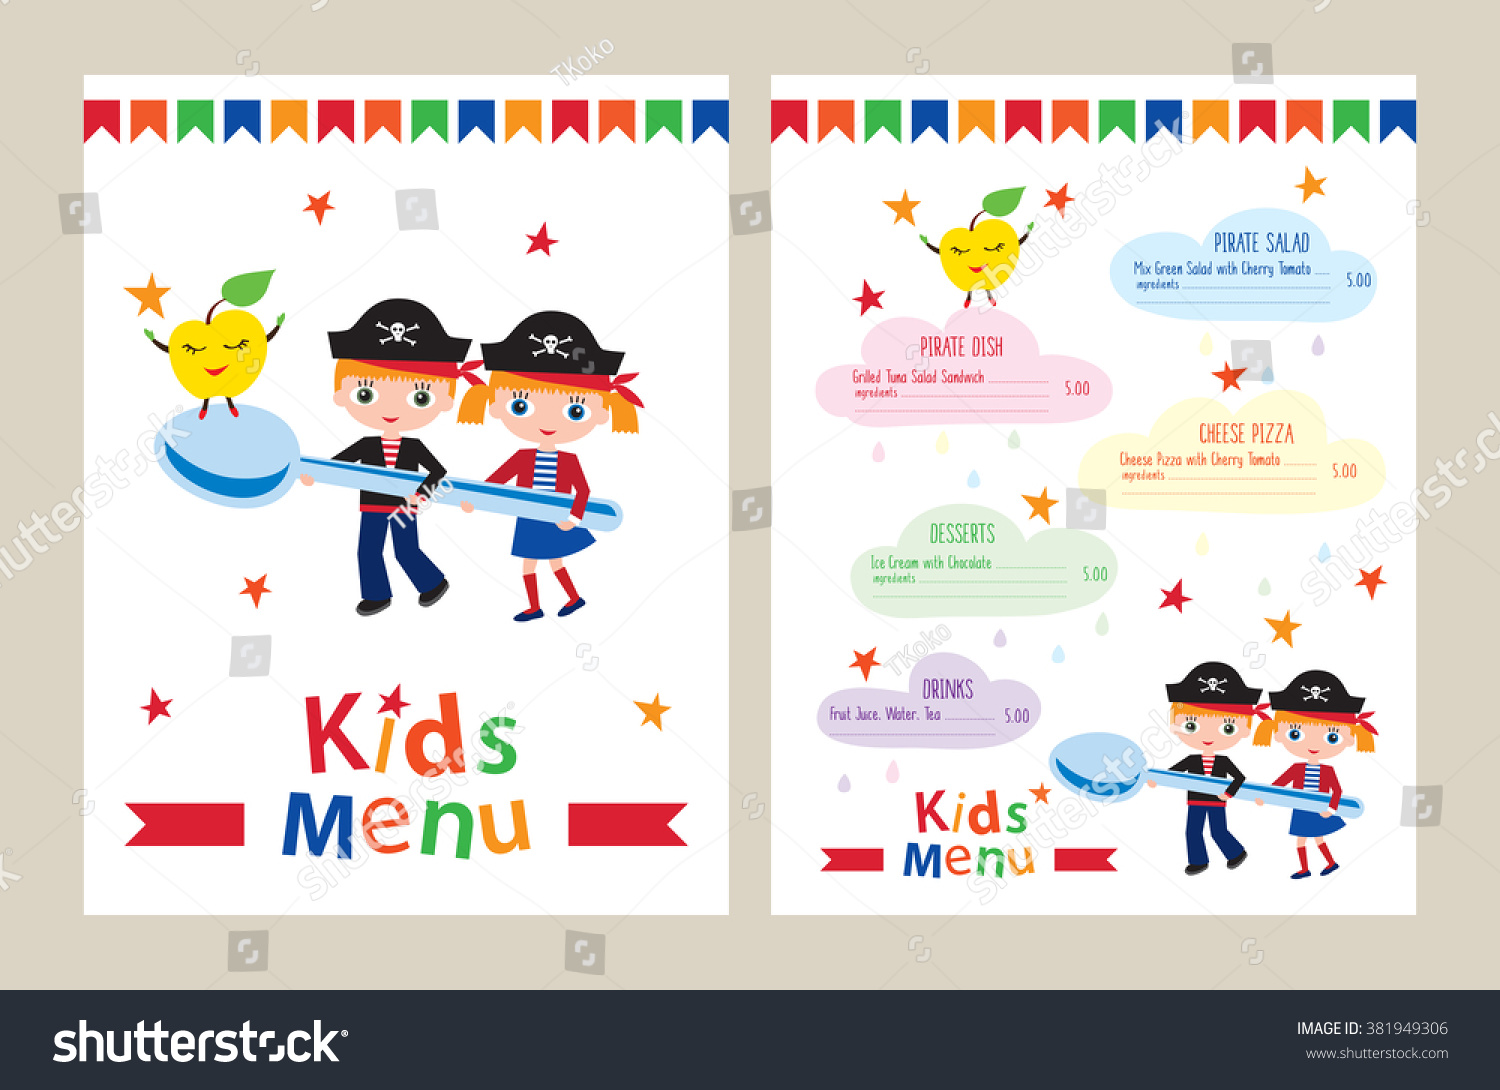 Birthday Party Menu Template from image.shutterstock.com